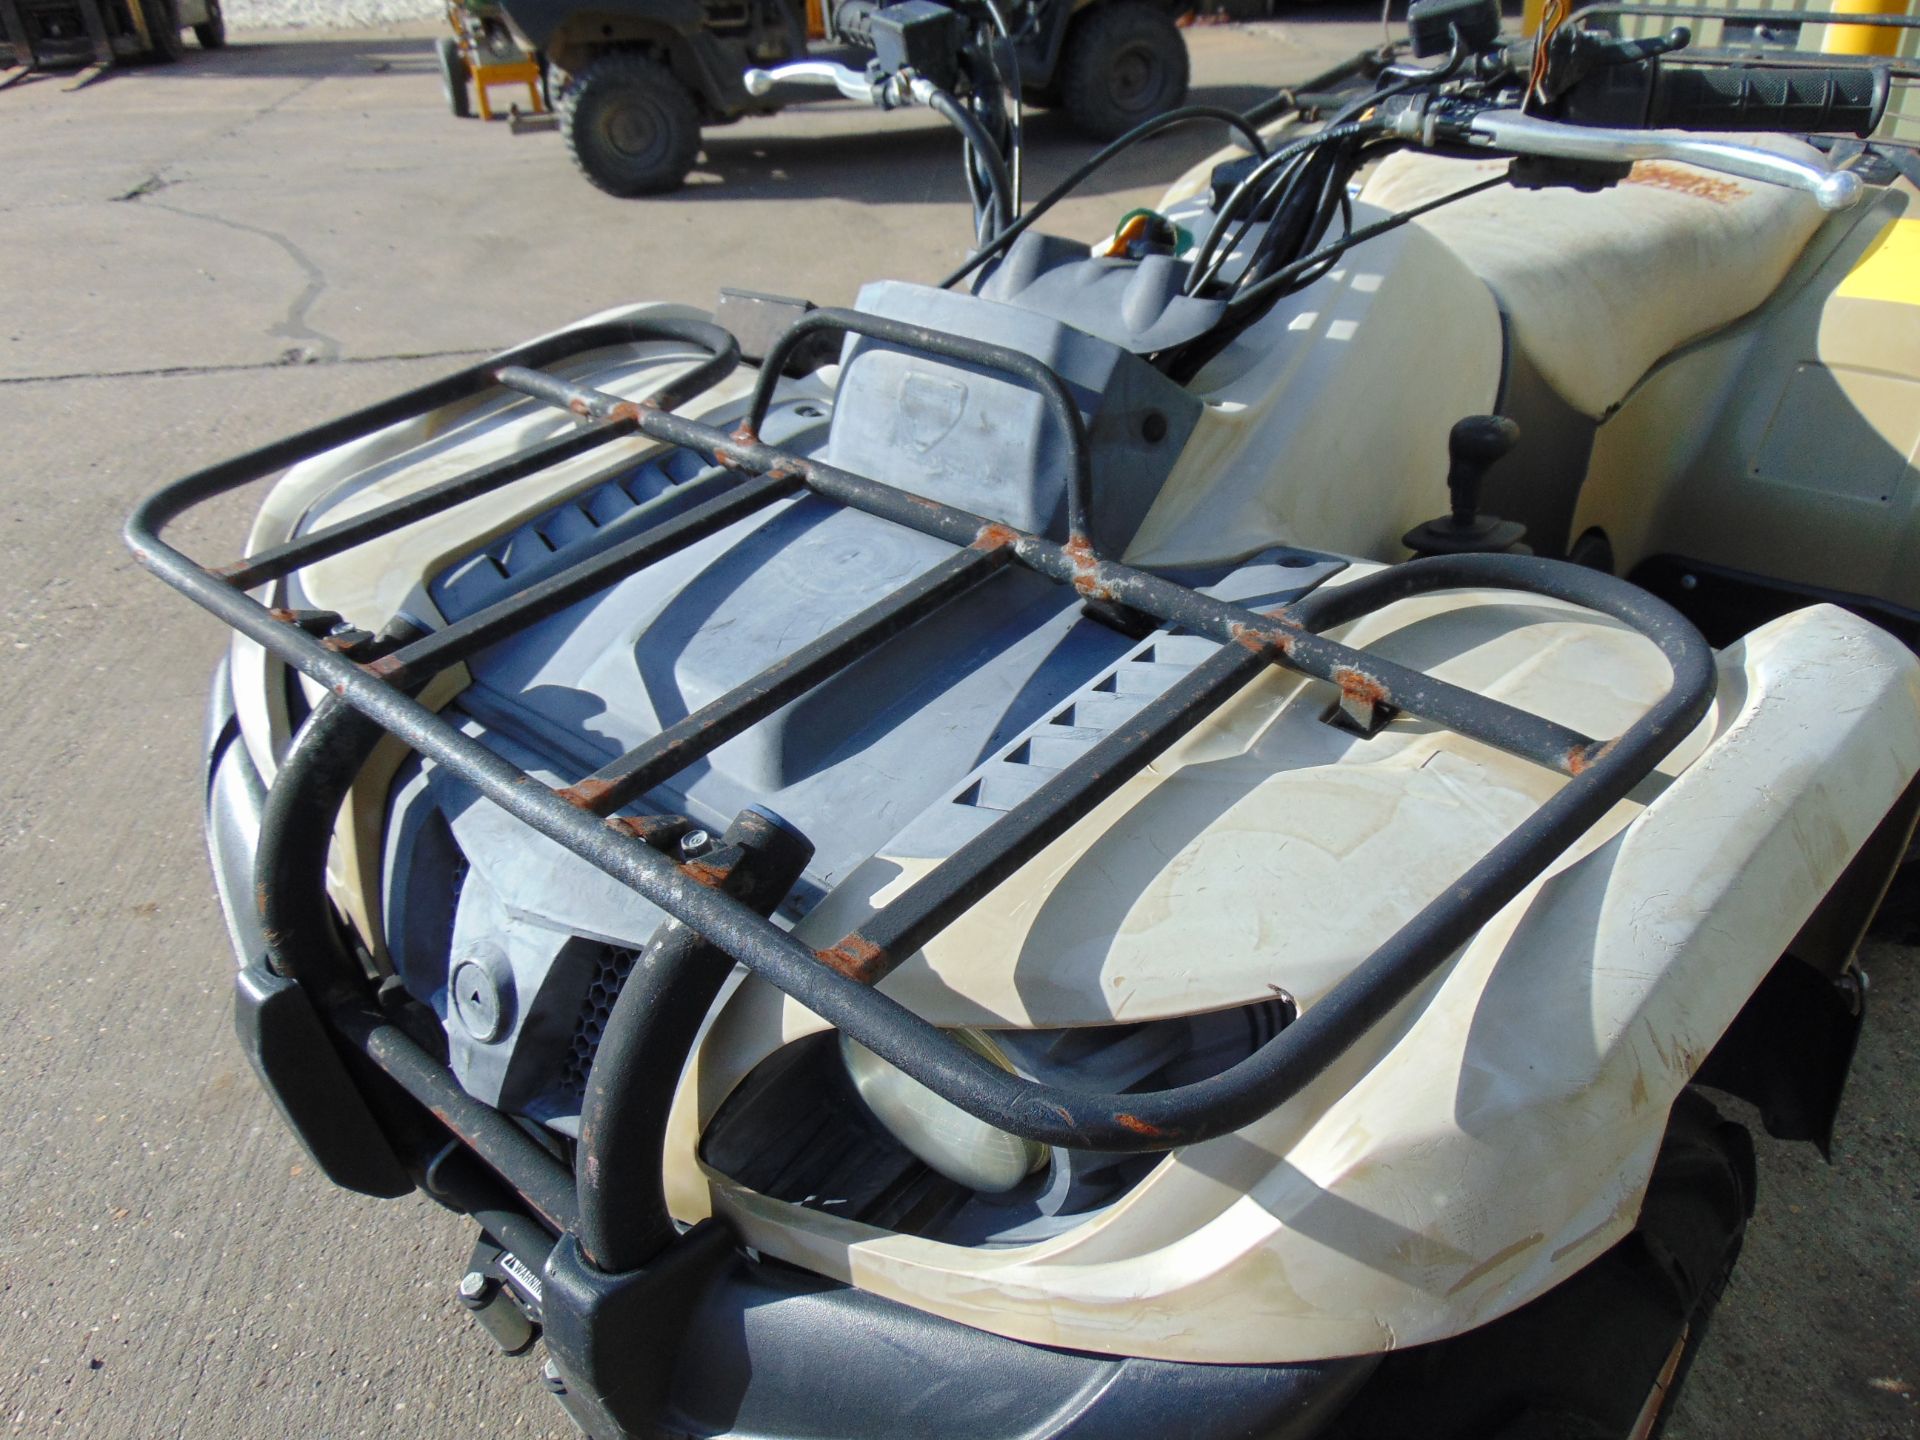 Recent Release Military Specification Yamaha Grizzly 450 4 x 4 ATV Quad Bike - Image 10 of 15